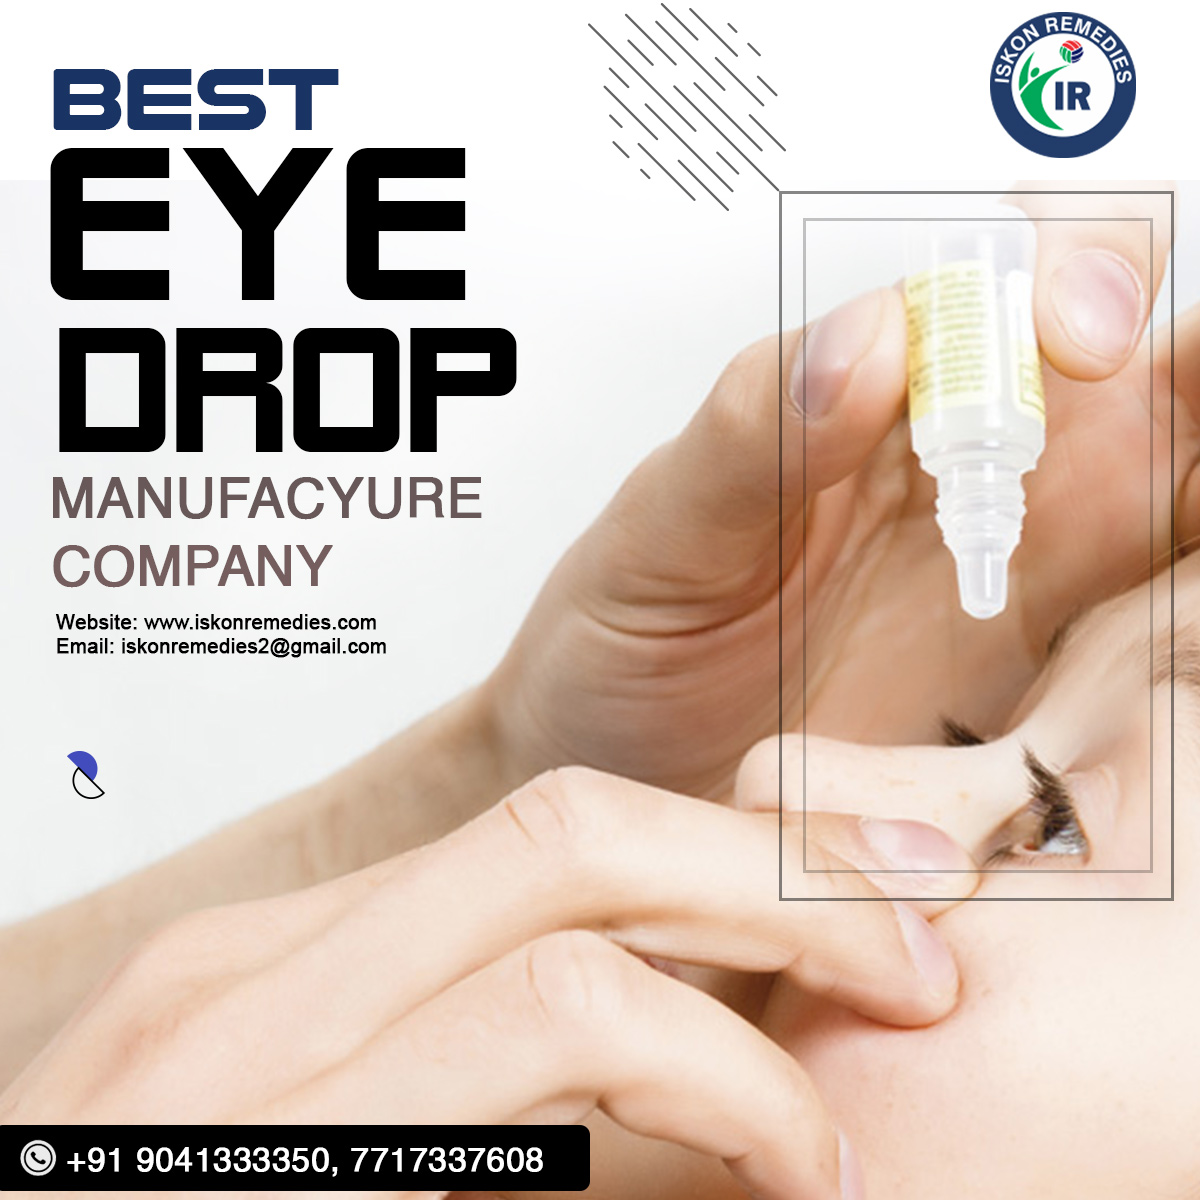 Sodium Chloride Eye Drops Manufacturer and Supplier in India